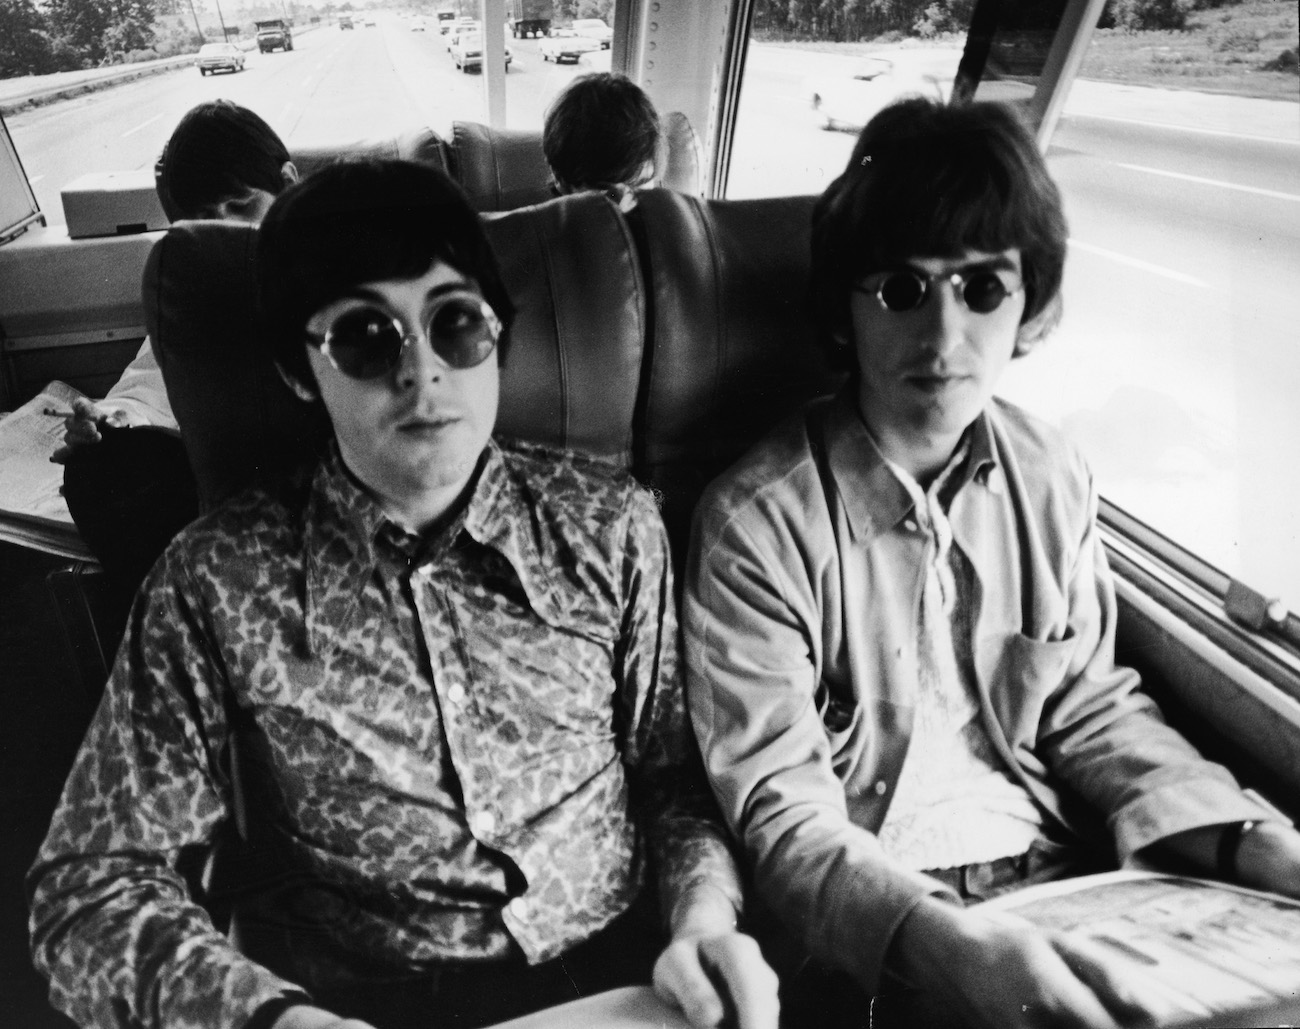 Paul McCartney and George Harrison on a tour bus in 1966.